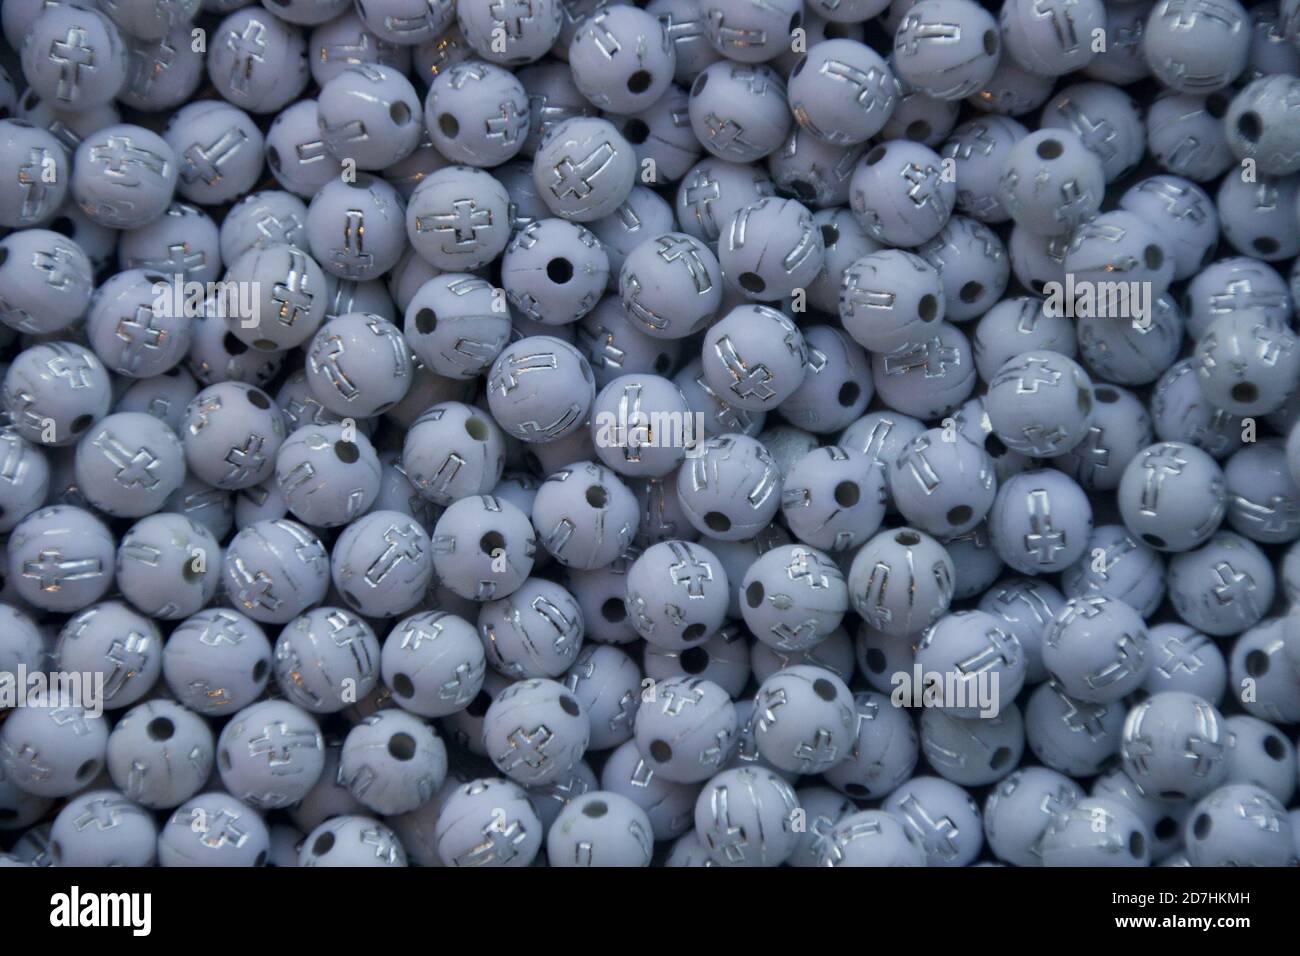 Cluster of white round shaped beads with cross engraved. Stock Photo